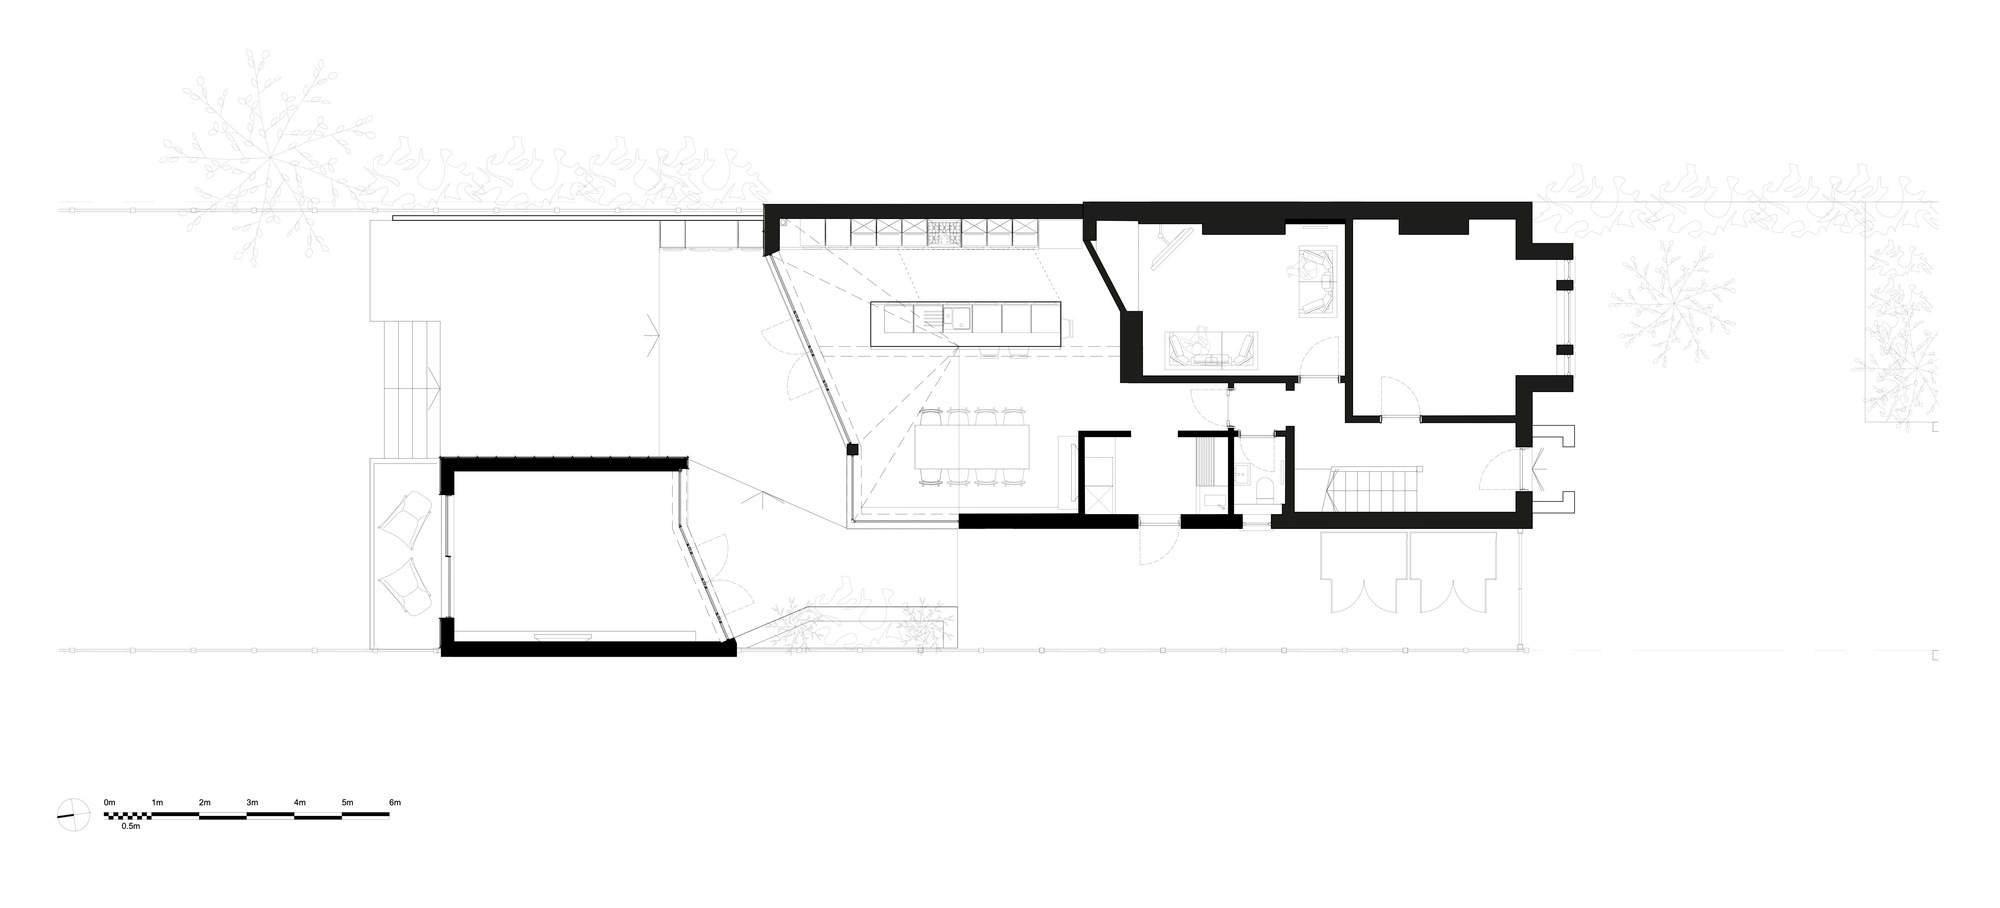 Ground floor plan of renovated Victorian family house in London